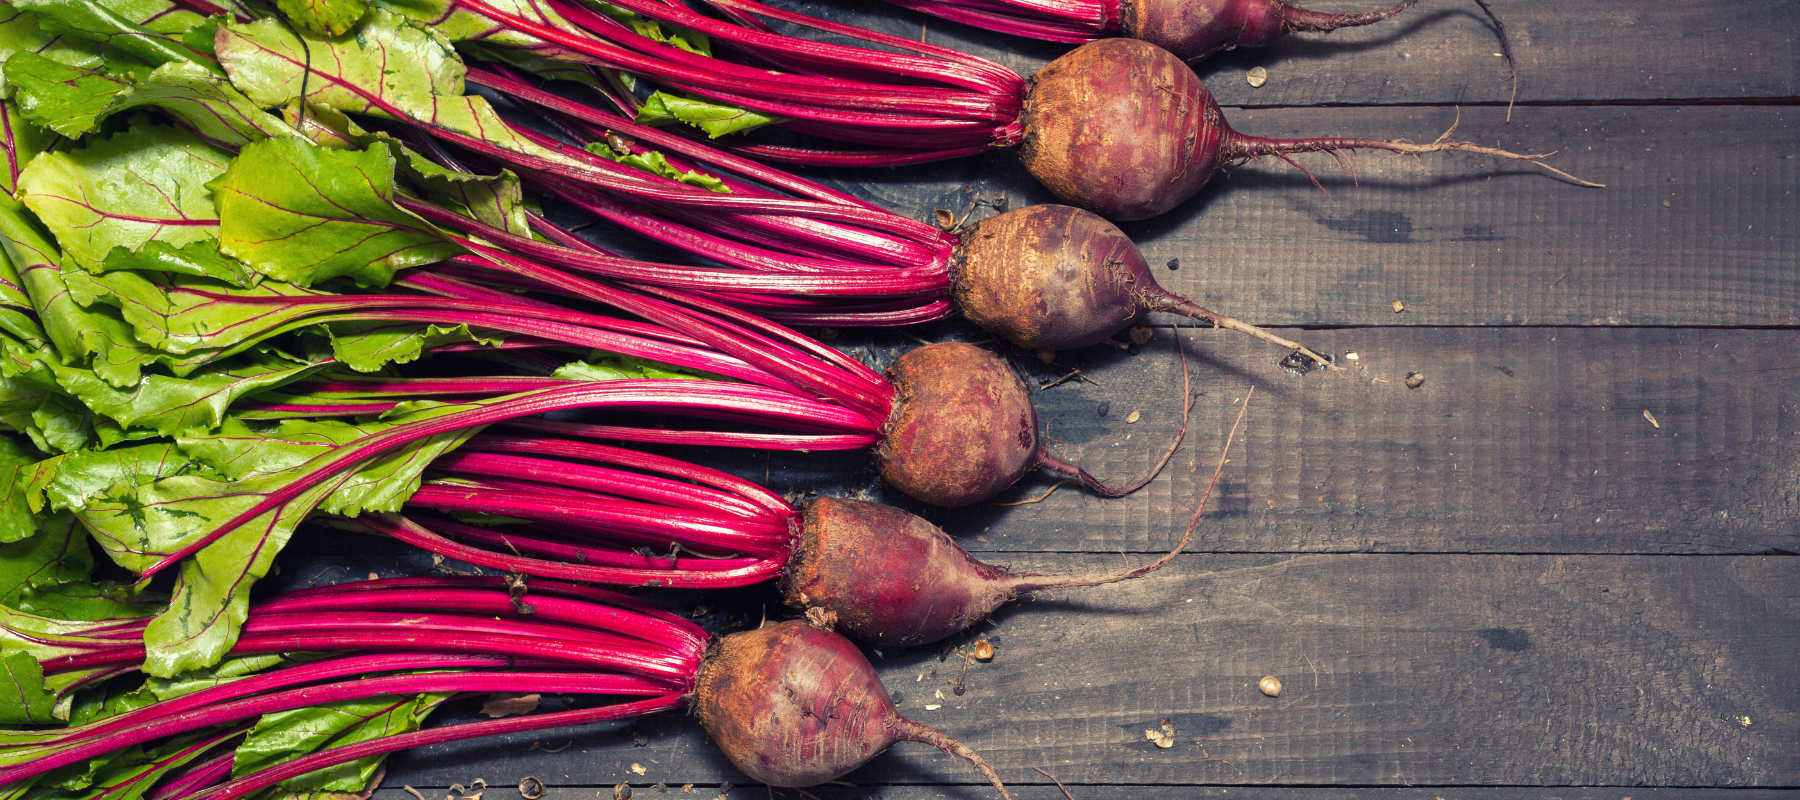 How to Grow Beetroot